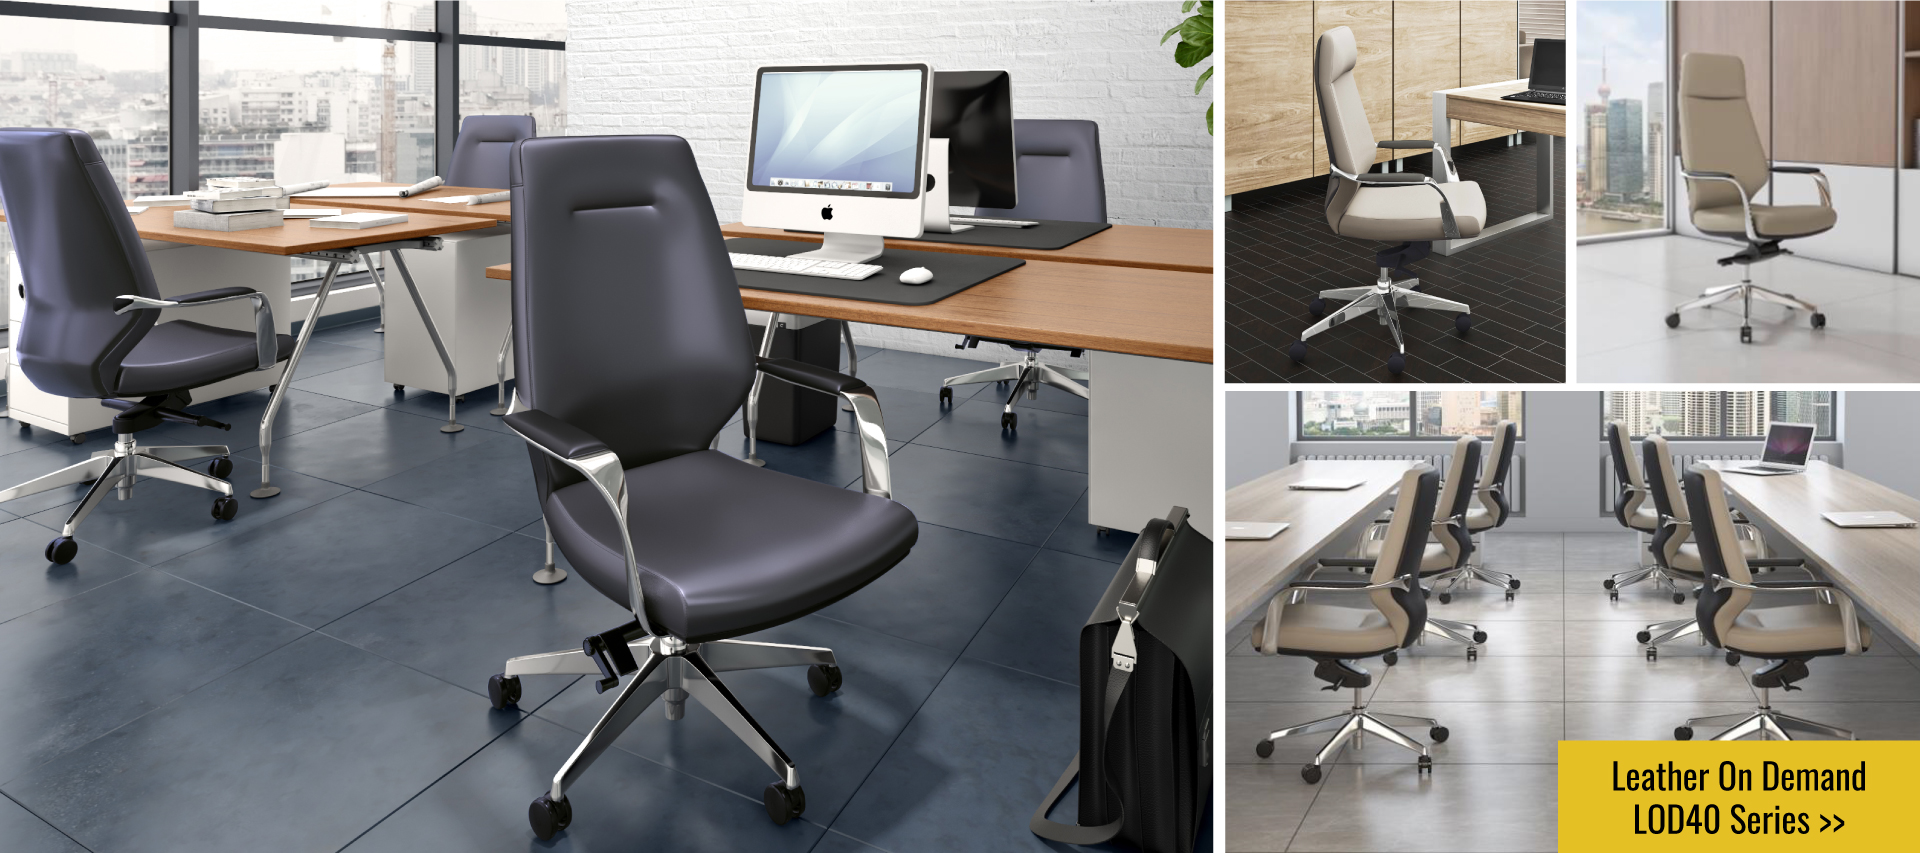 Leather Office Chairs - Lod45 and LOD48